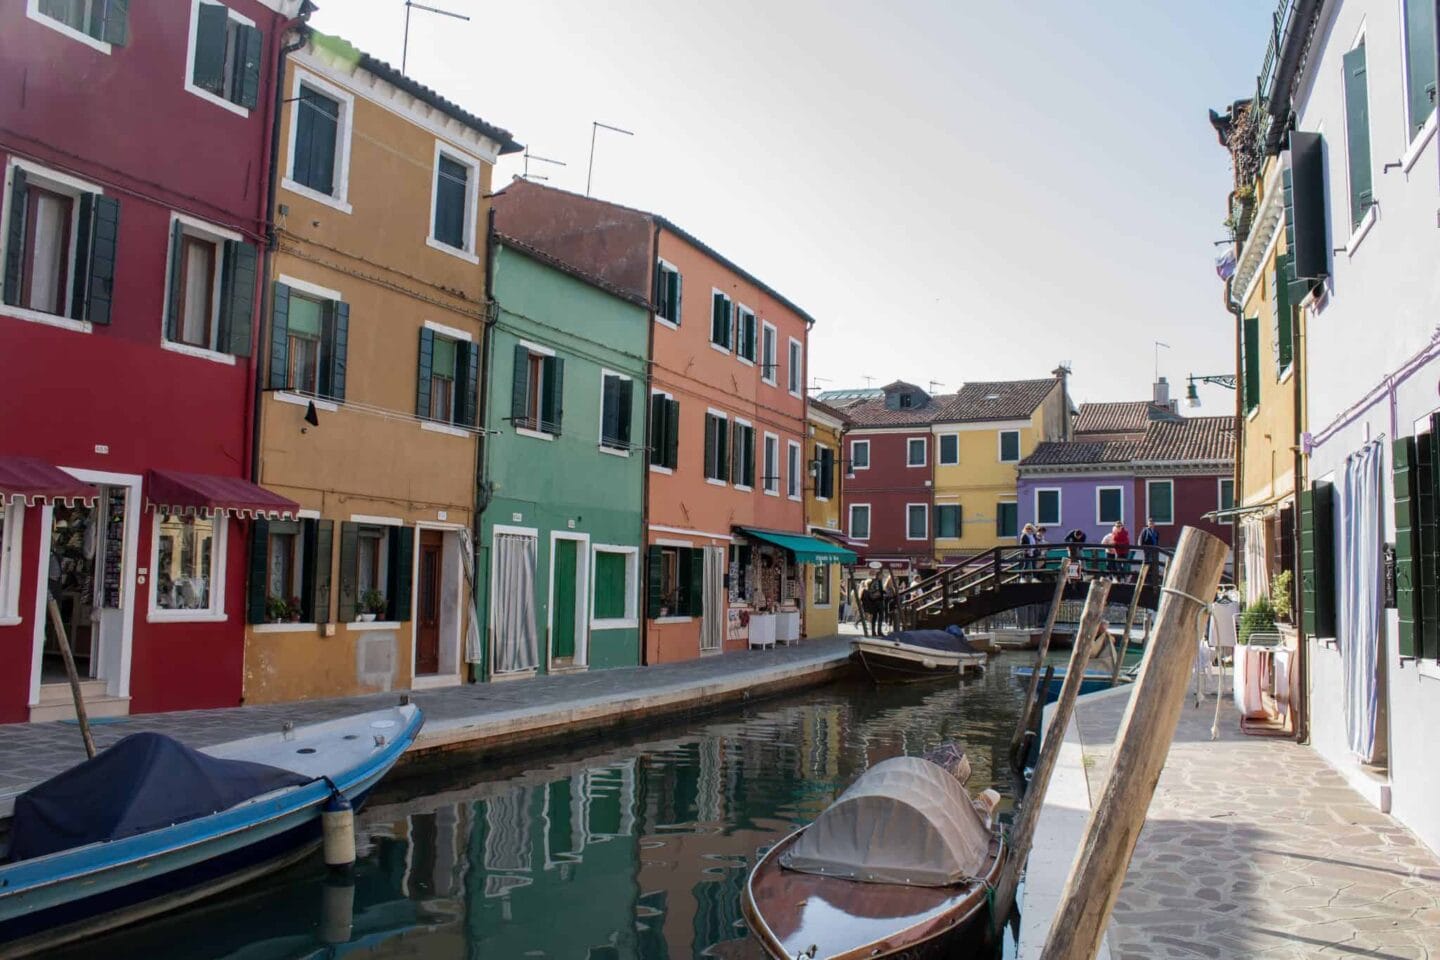 Things to do in Burano - Walk along the canals